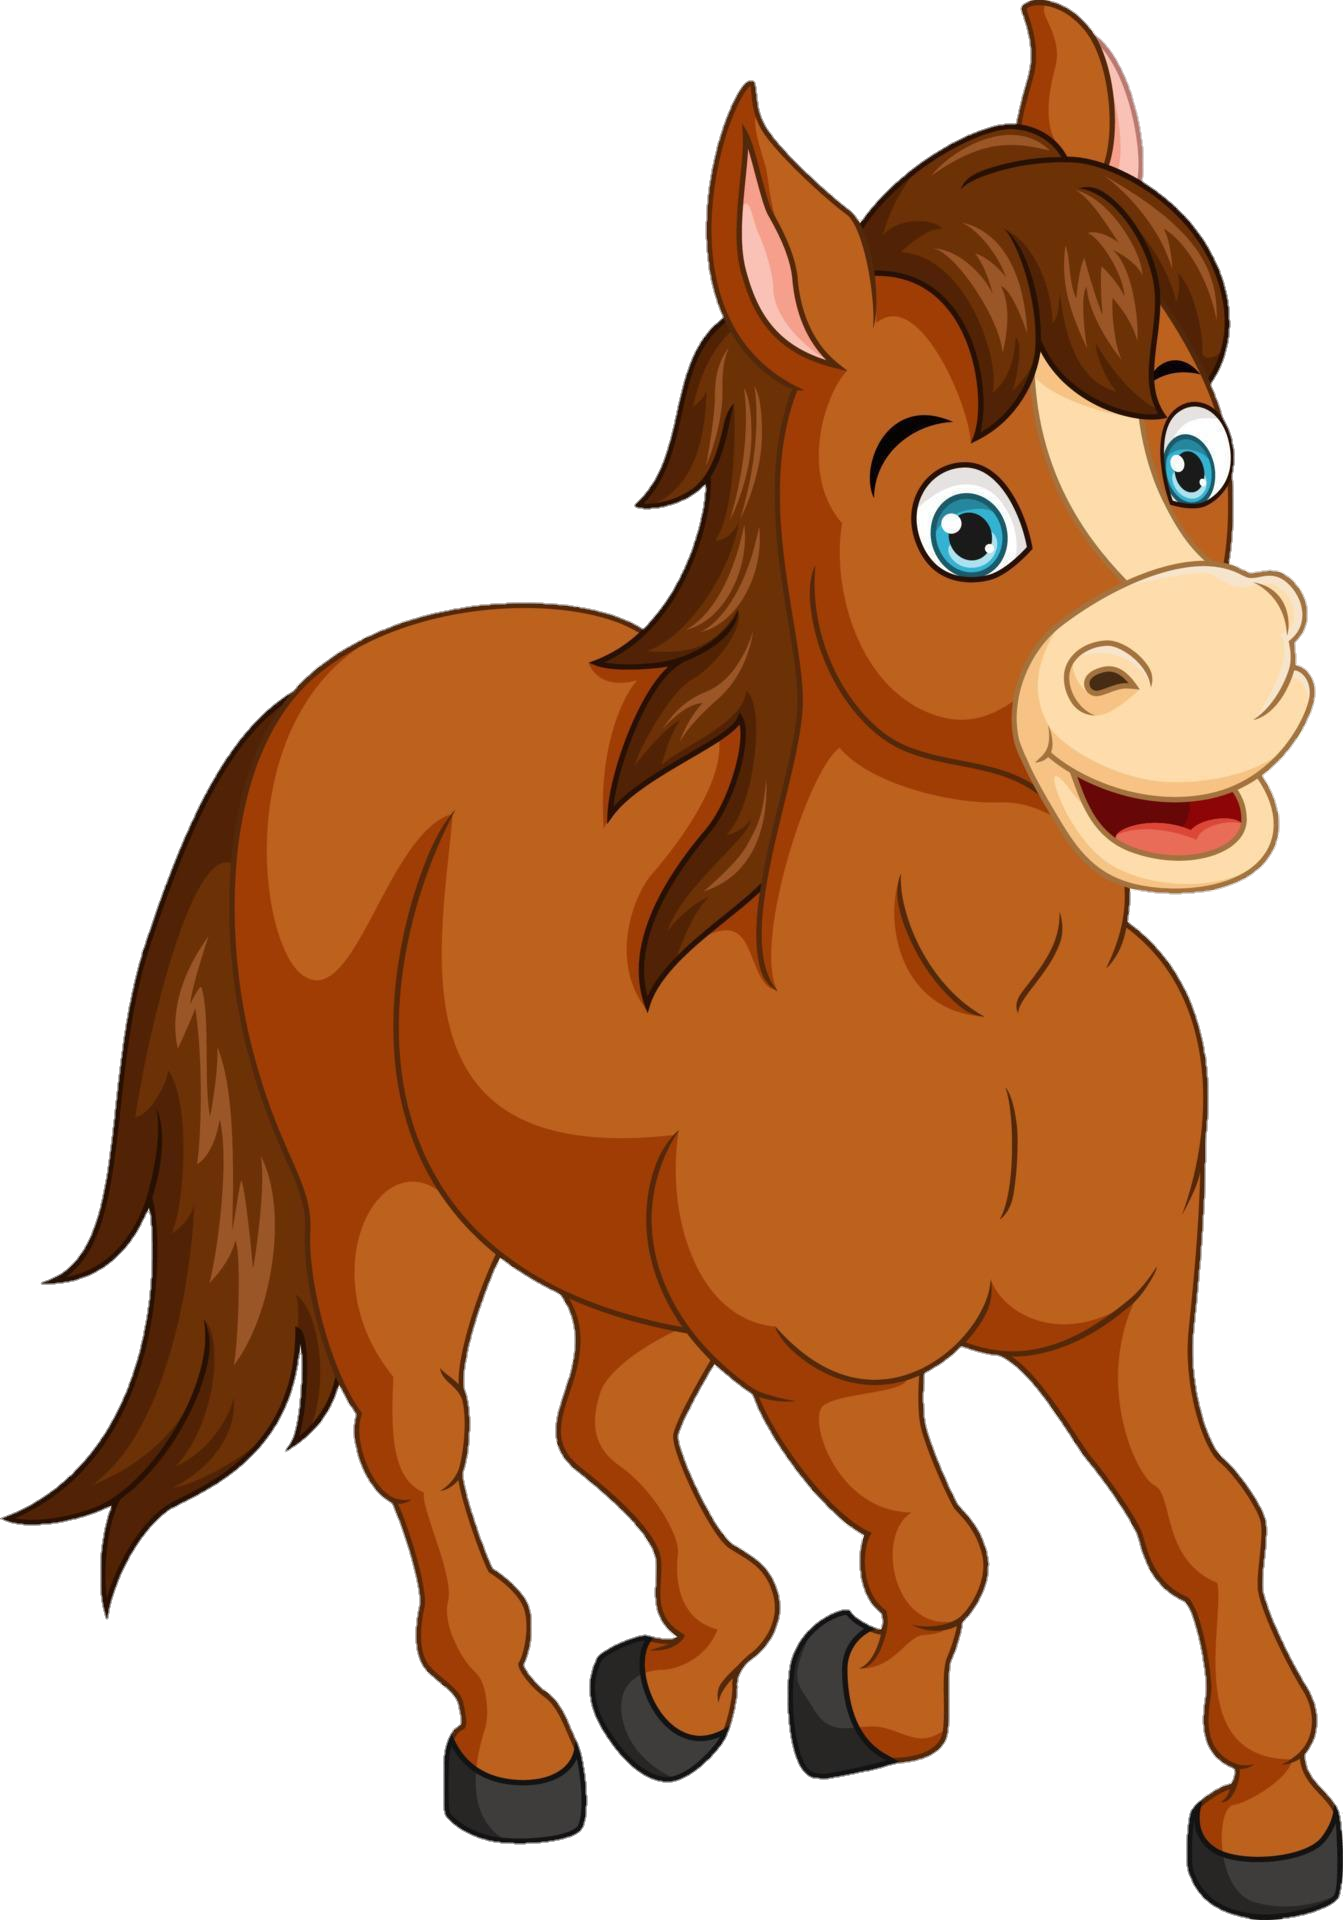 horse-png-from-pngfre-6